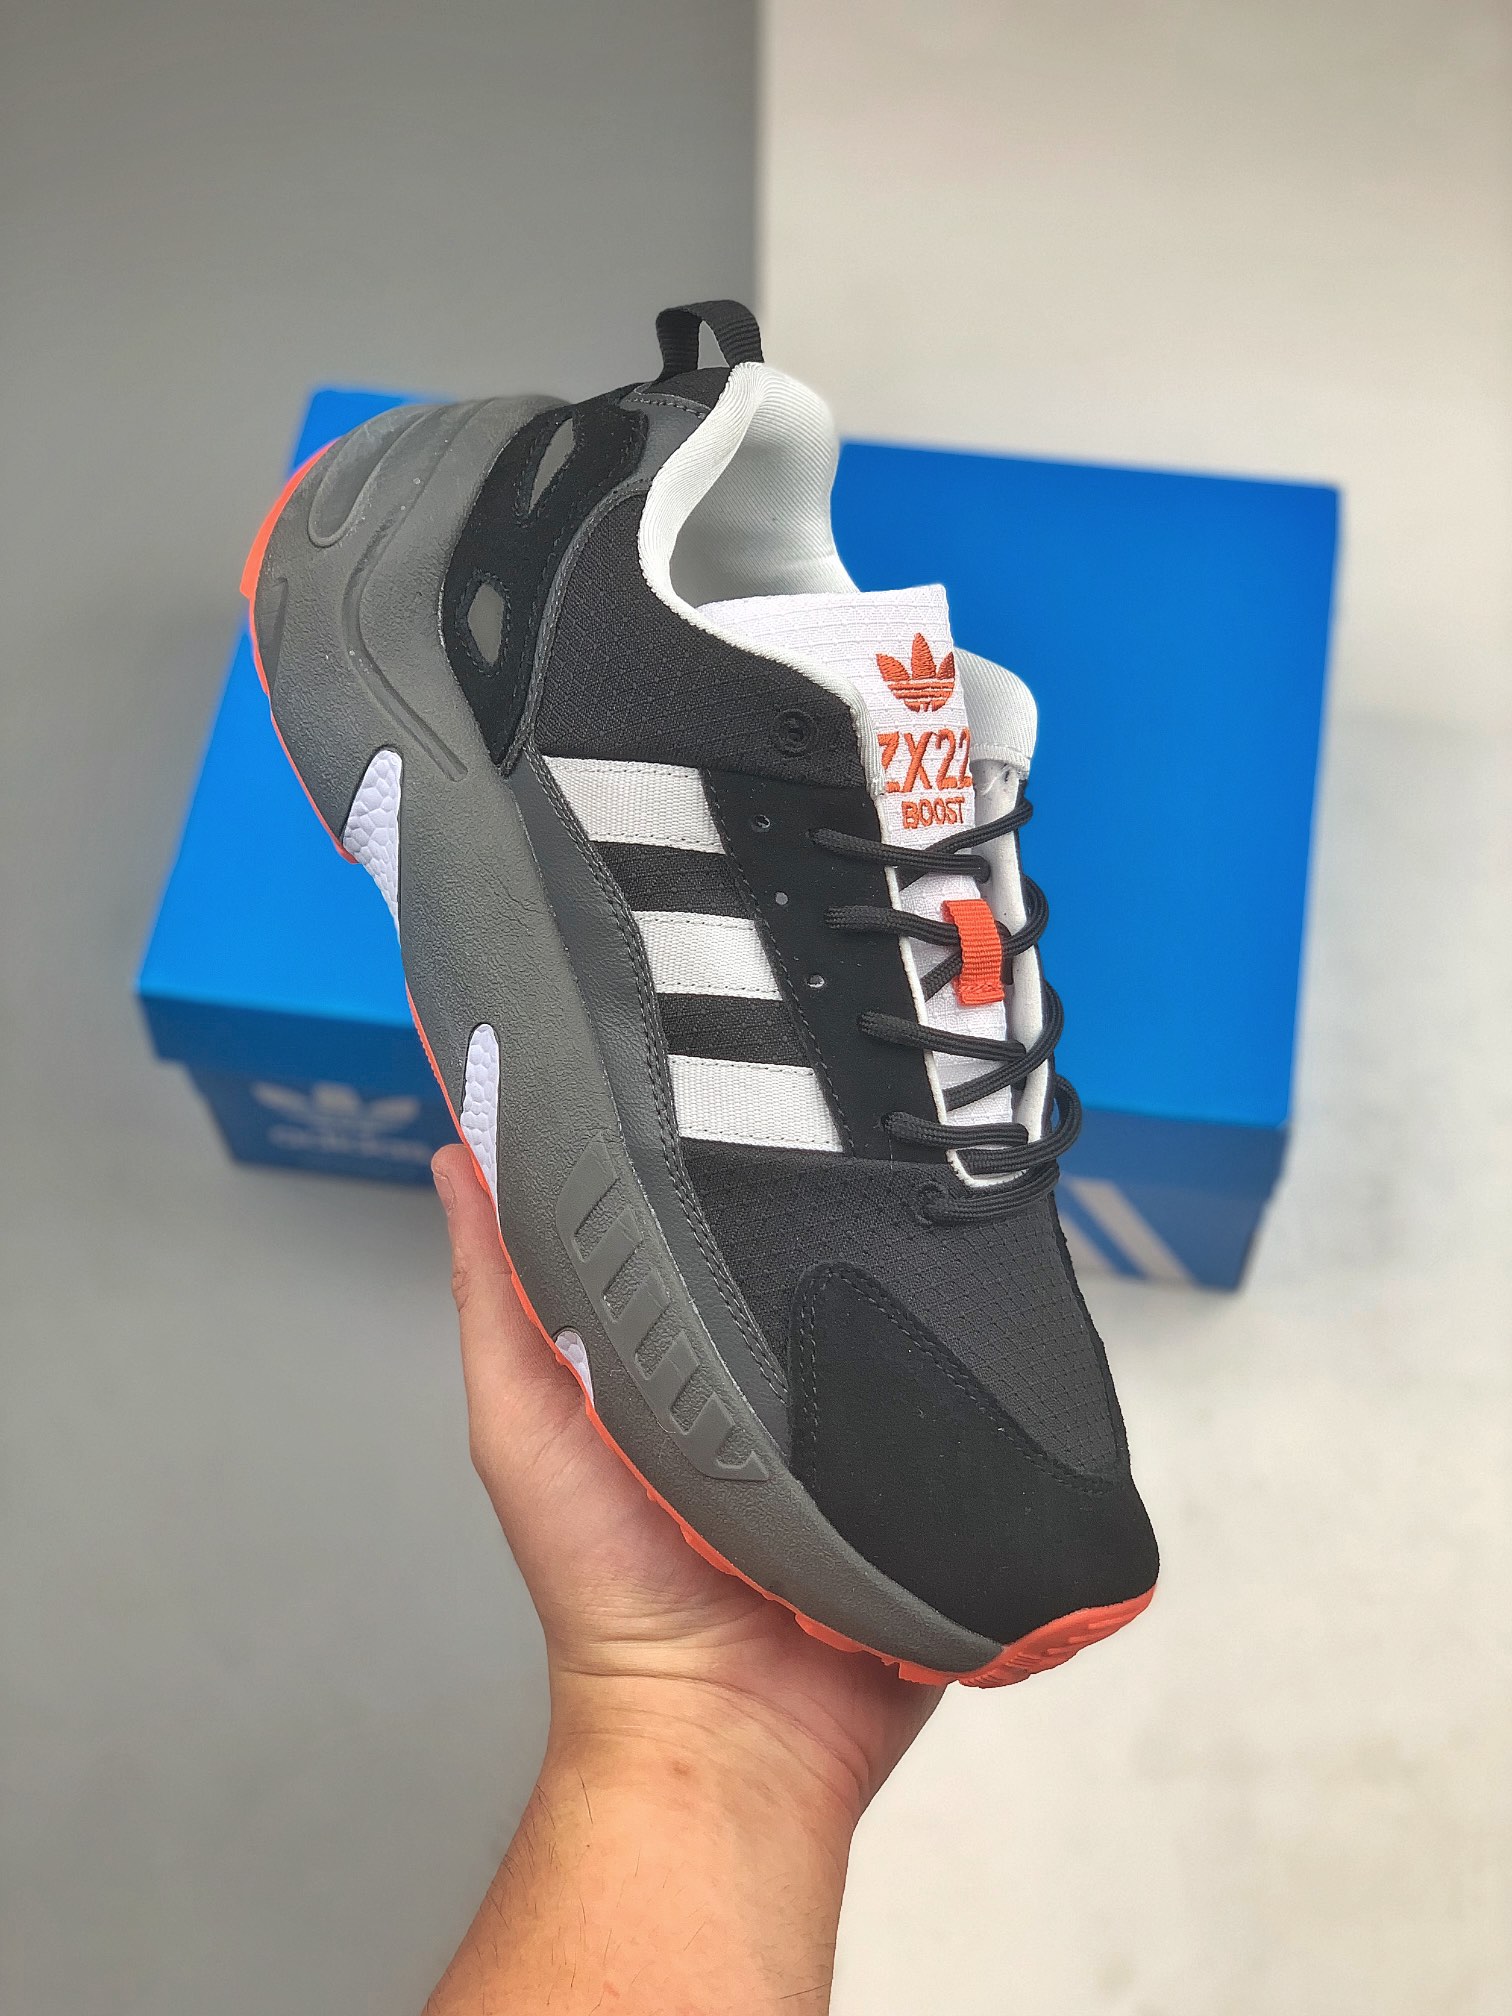 Adidas ZX 22 Boost GX8662 - Black Grey Sneakers | Limited Stock